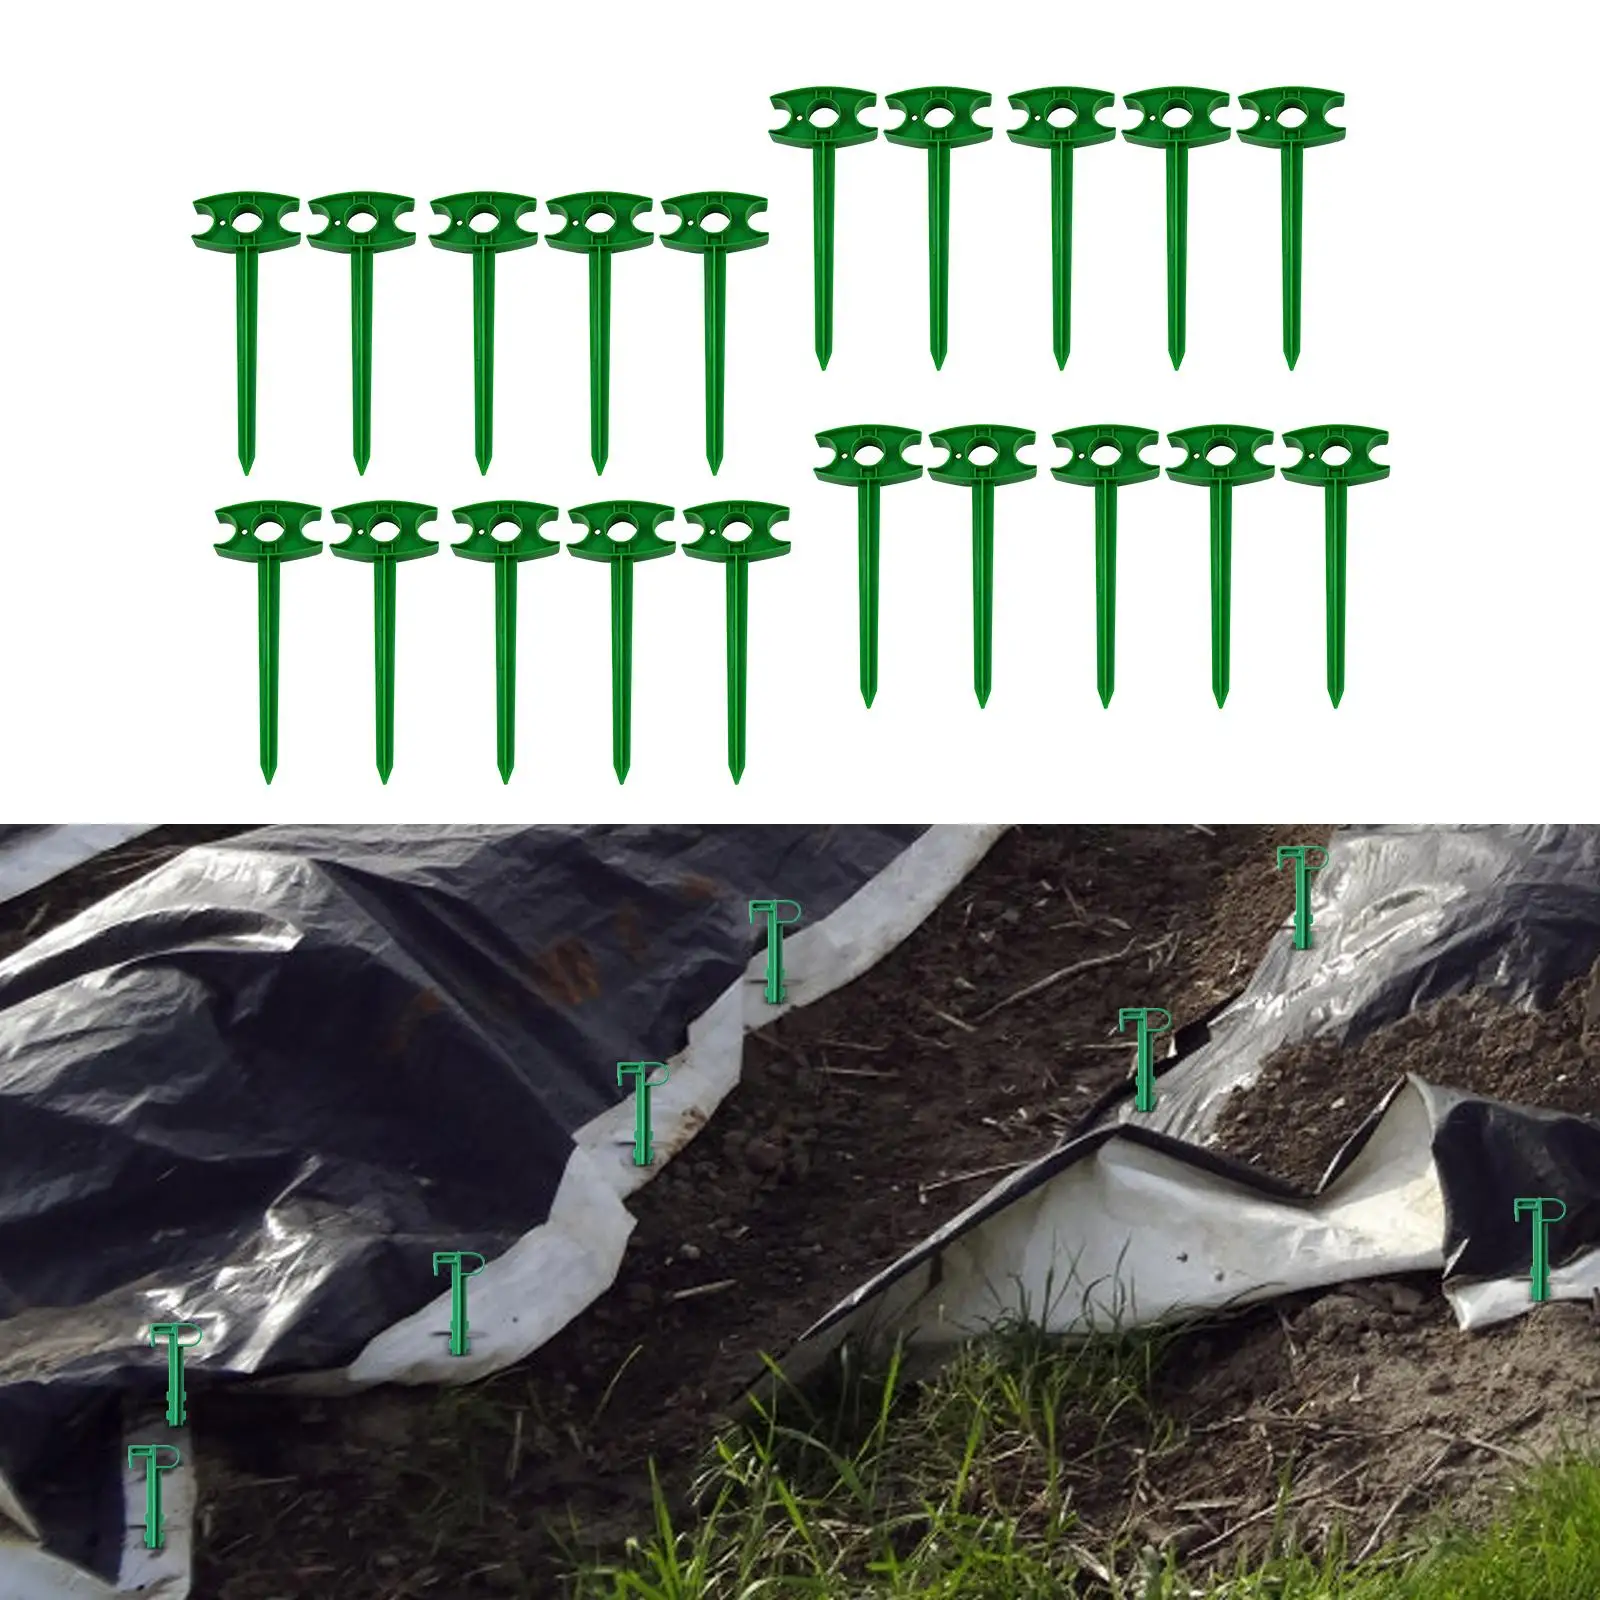 20x Garden Stakes Landscape Nails Anchor Yard Landscape Stakes for Holding Down Tents Greenhouse Keeping Garden Netting Down